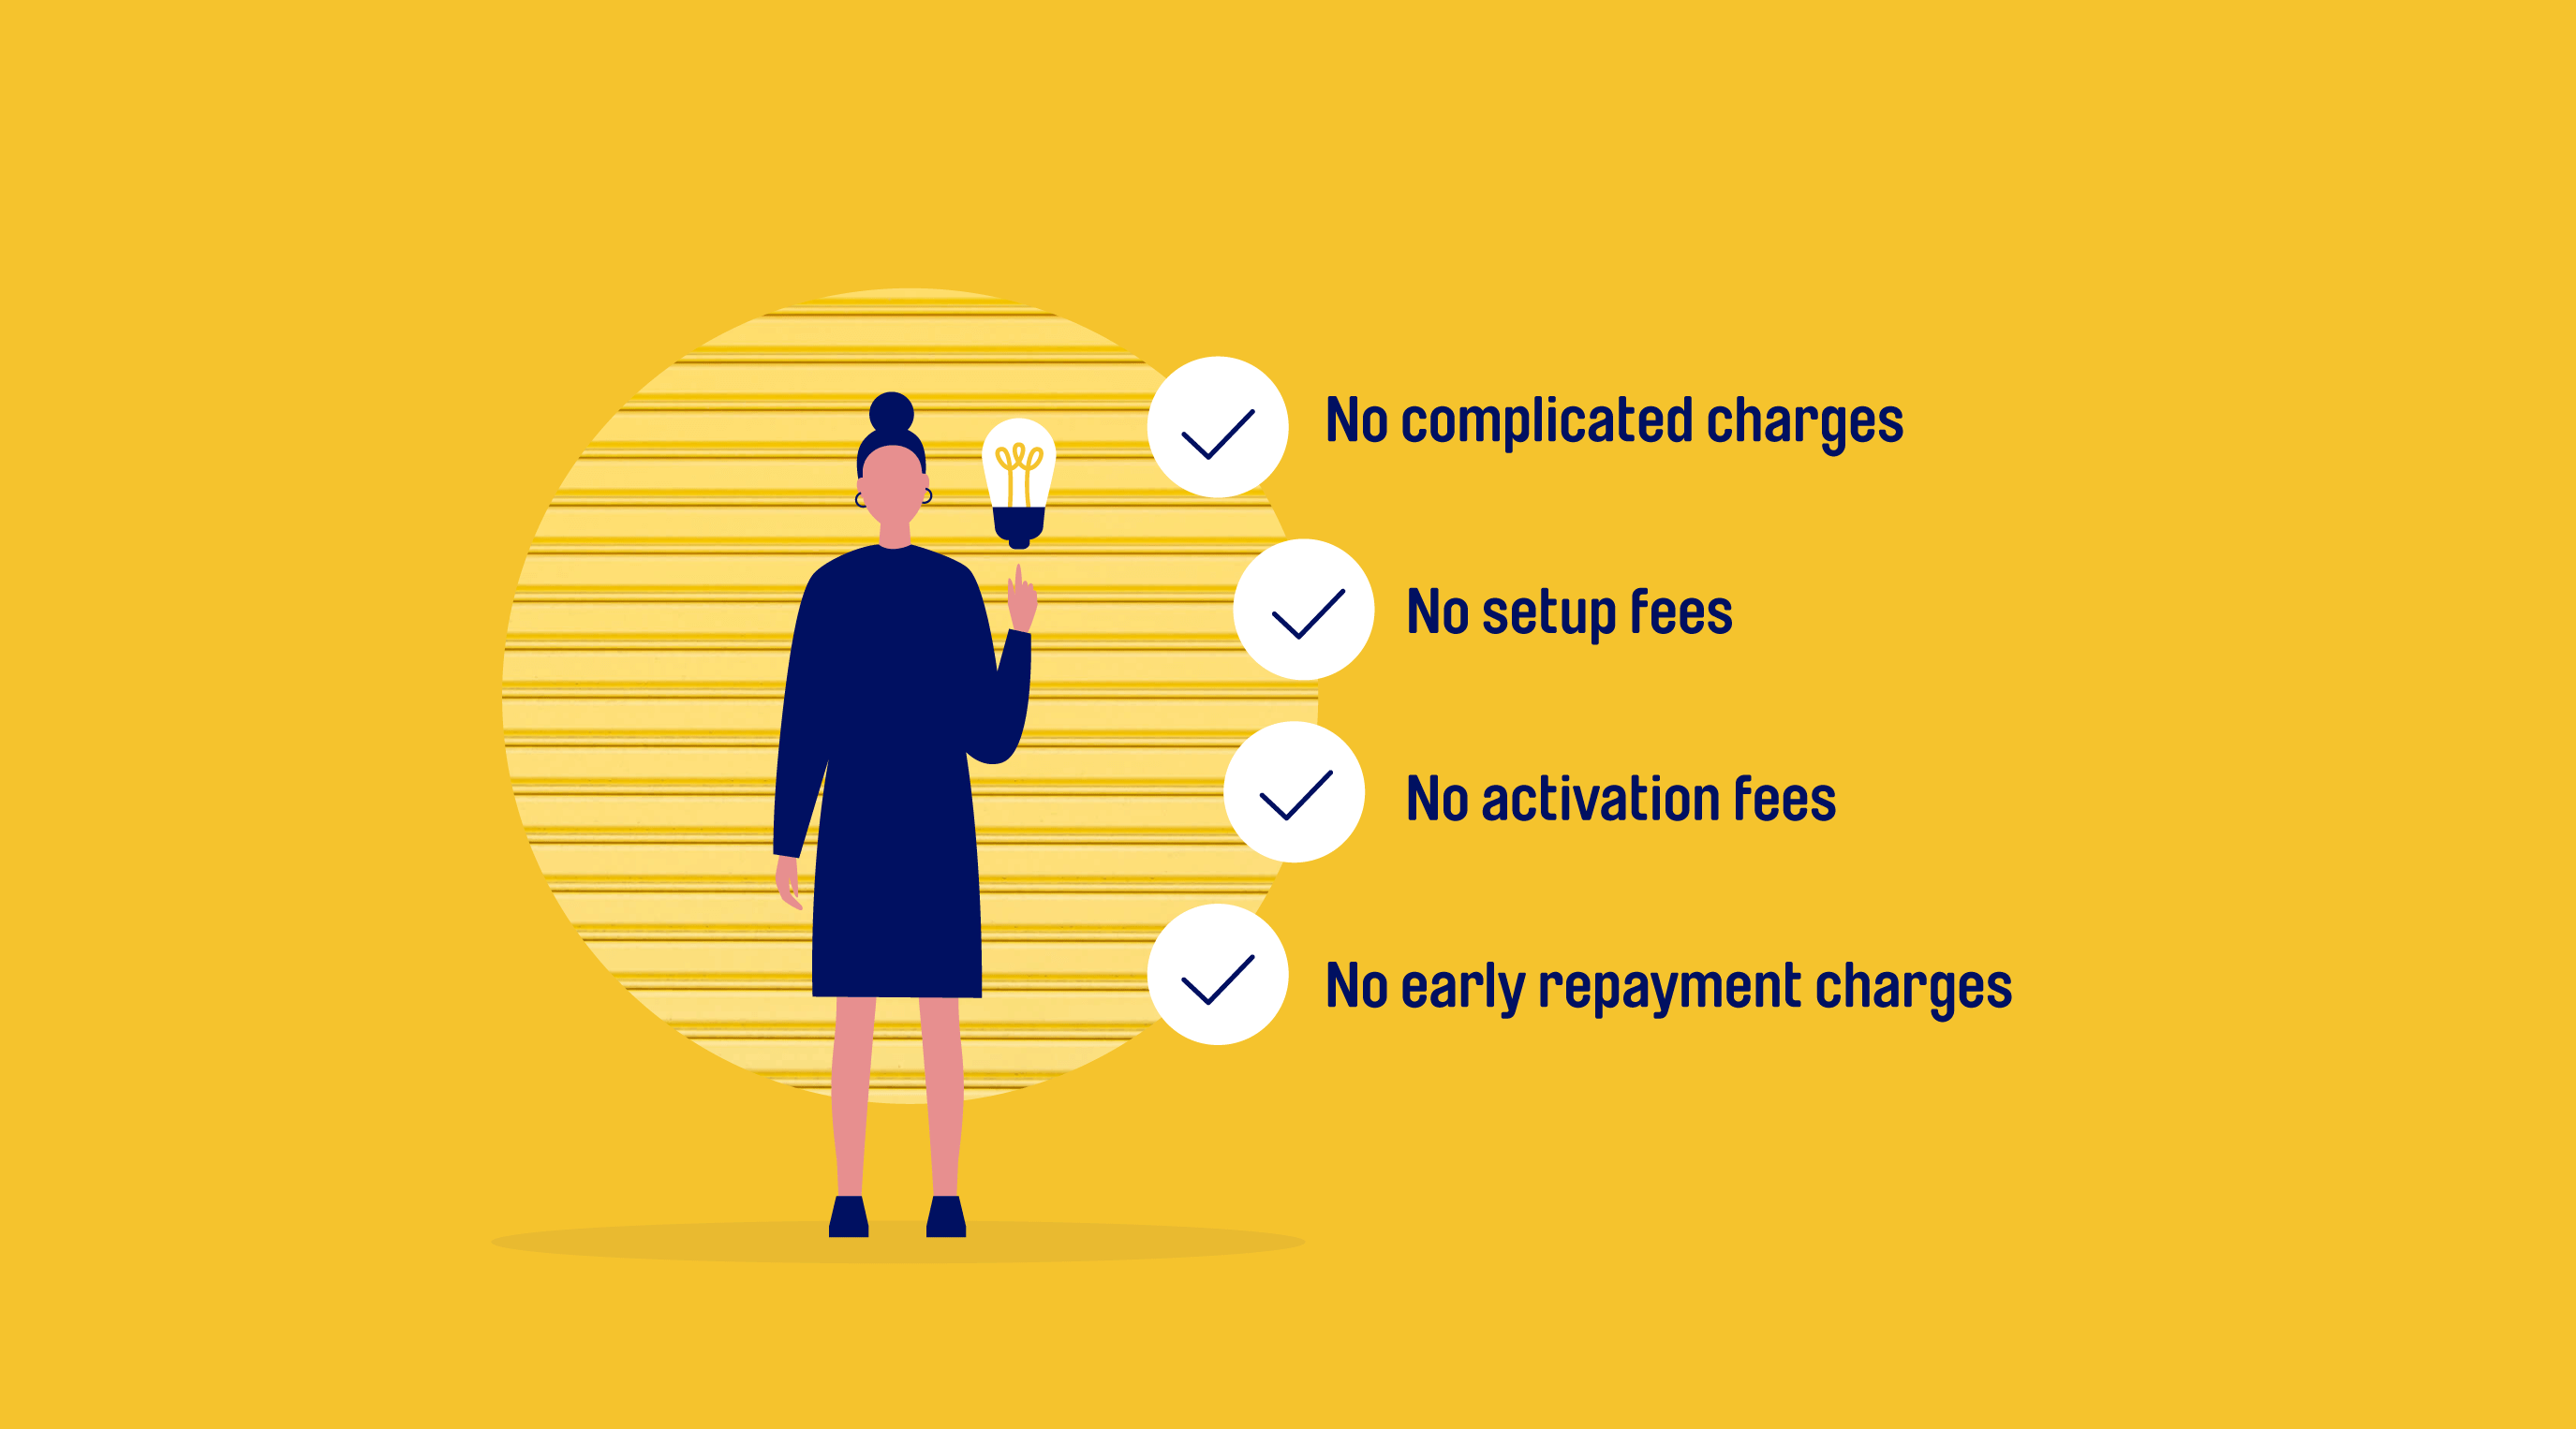 Illustration of a woman with a lightbulb. Four bullet points come off the lightbulb: No complicated charges, No set up fees, No activation fees, No early repayment charges